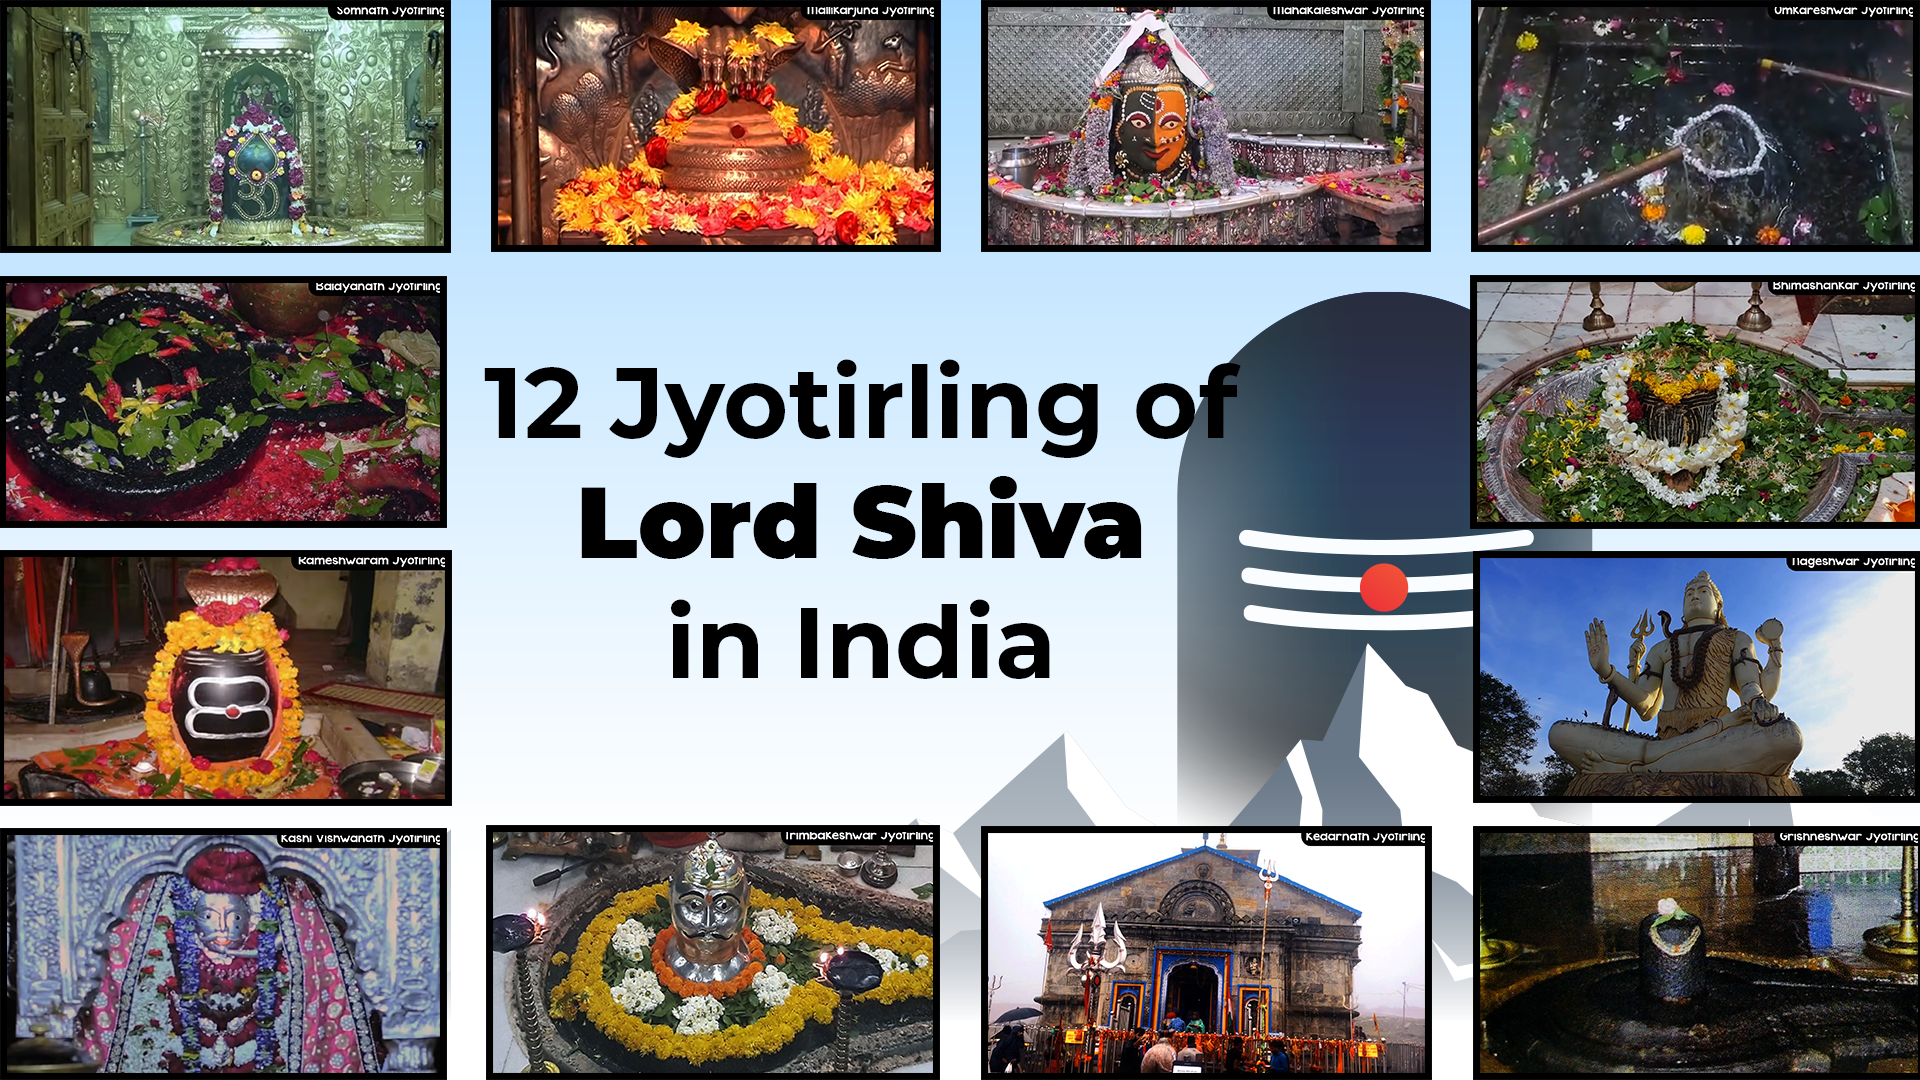 12 Jyotirling of Lord Shiva in India